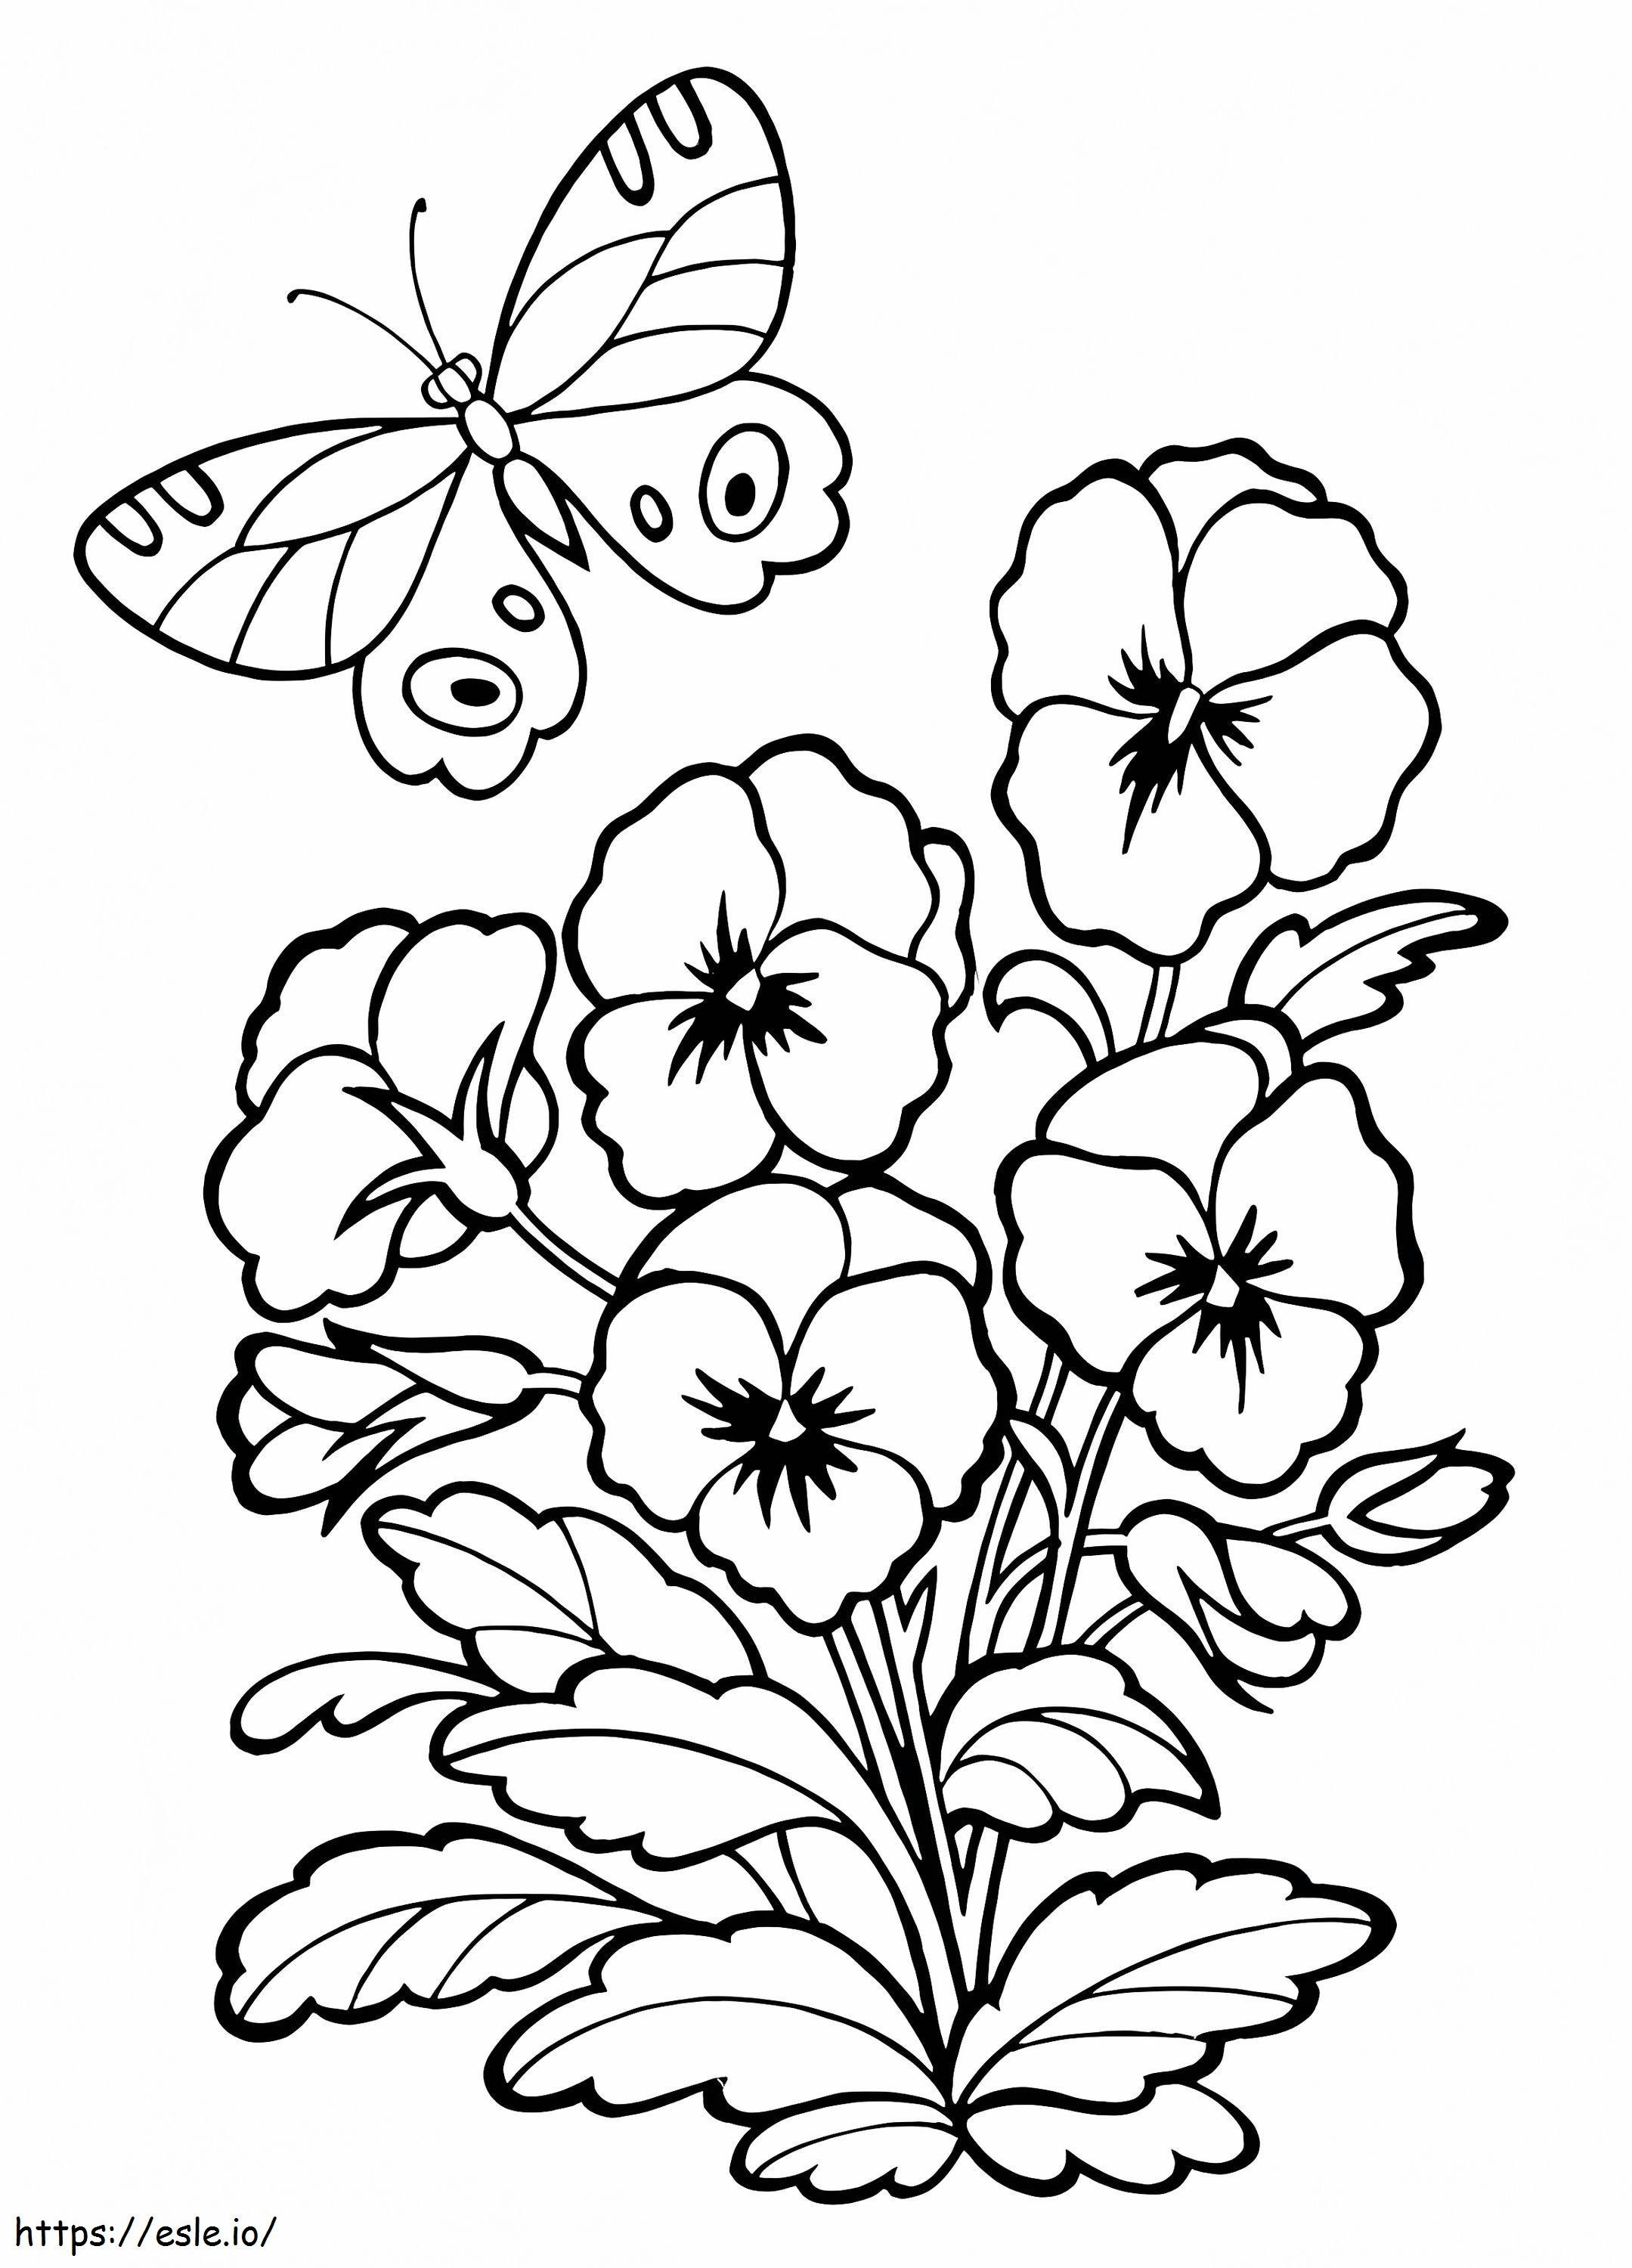 Pansies And Butterfly coloring page